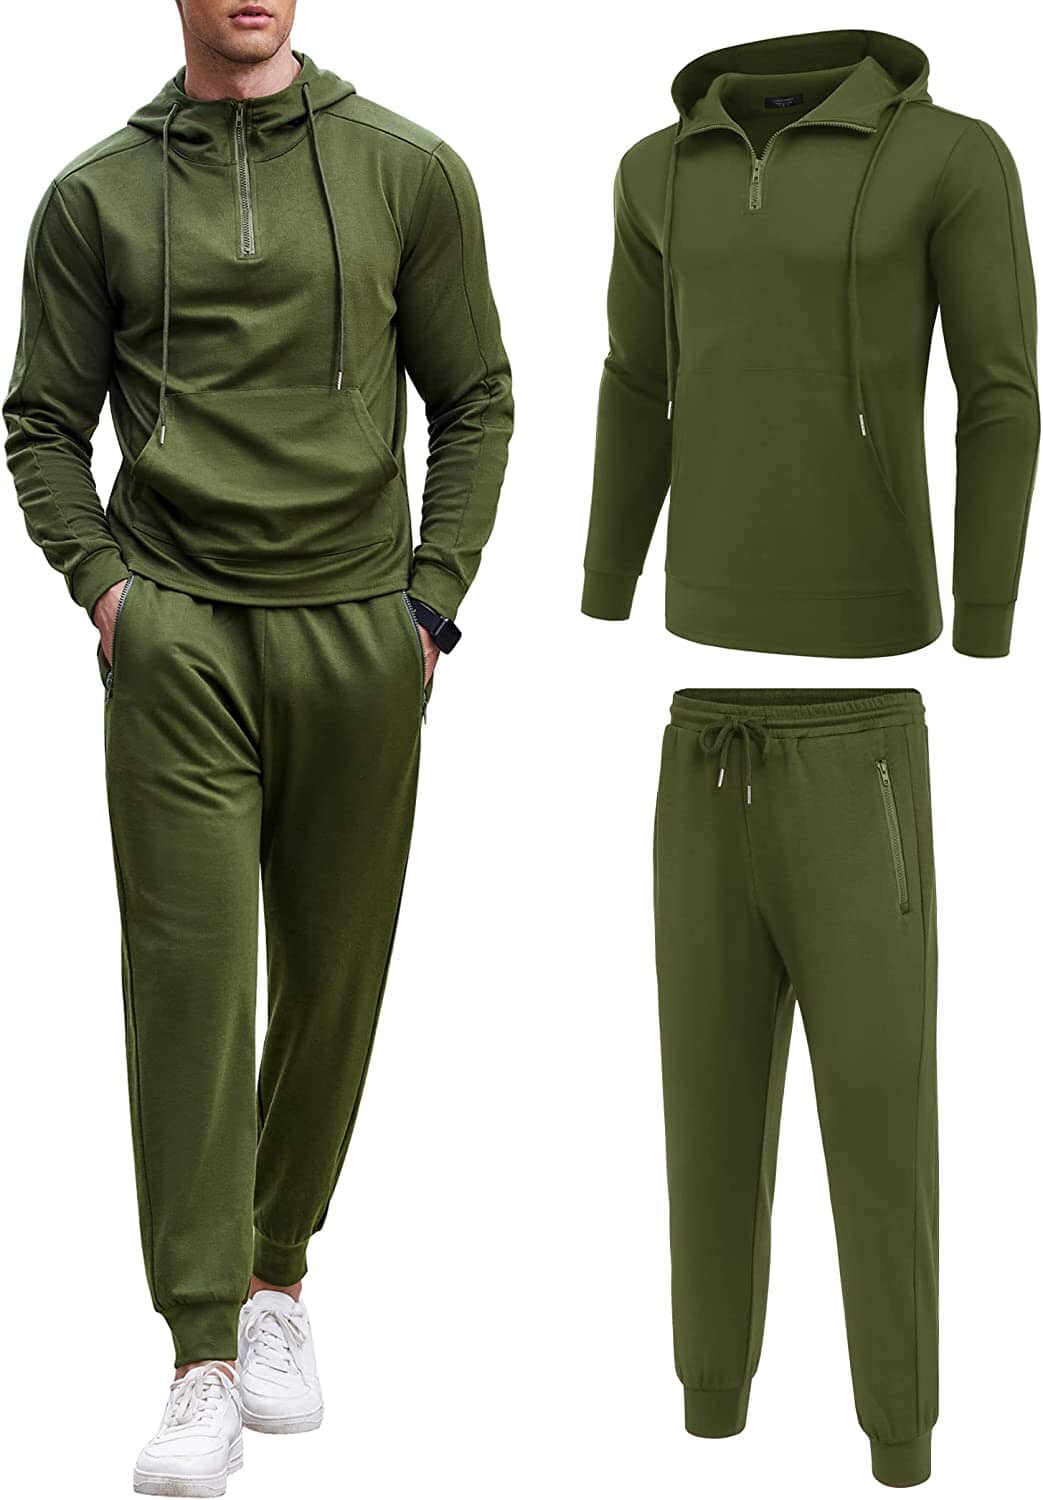 2 Piece Zip Hoodie and Sweatpants Set (US Only) Sports Set COOFANDY Store Army Green S 